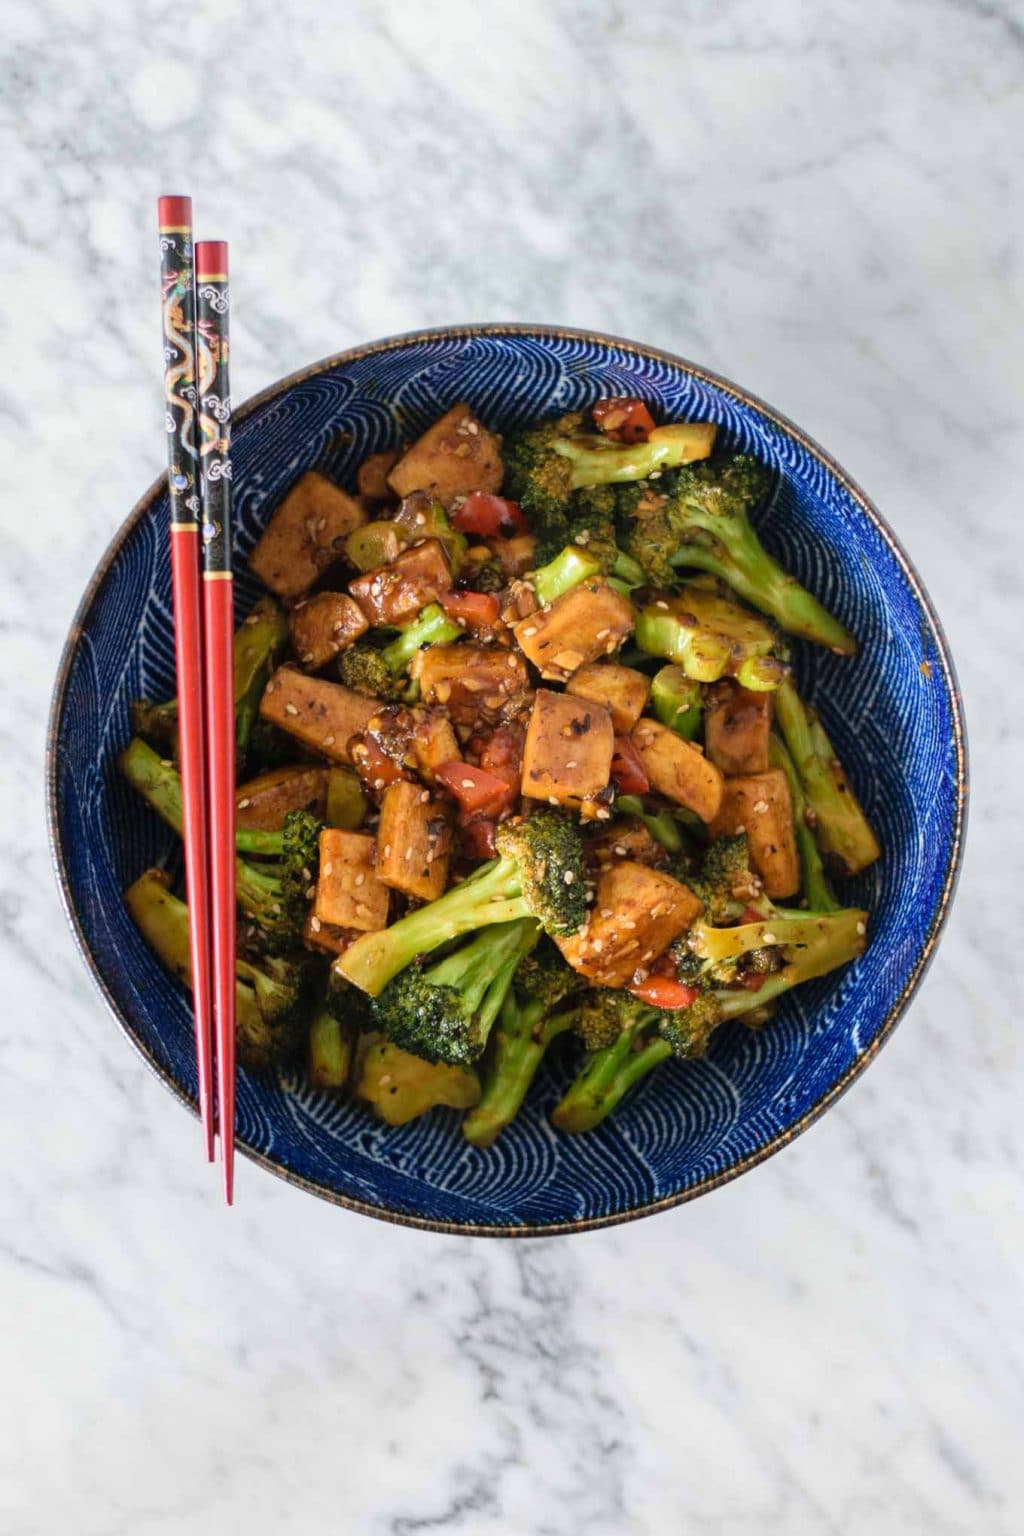 Broccoli And Tofu With Black Bean Sauce The Curious Chickpea,Amazon Parrots In The Wild